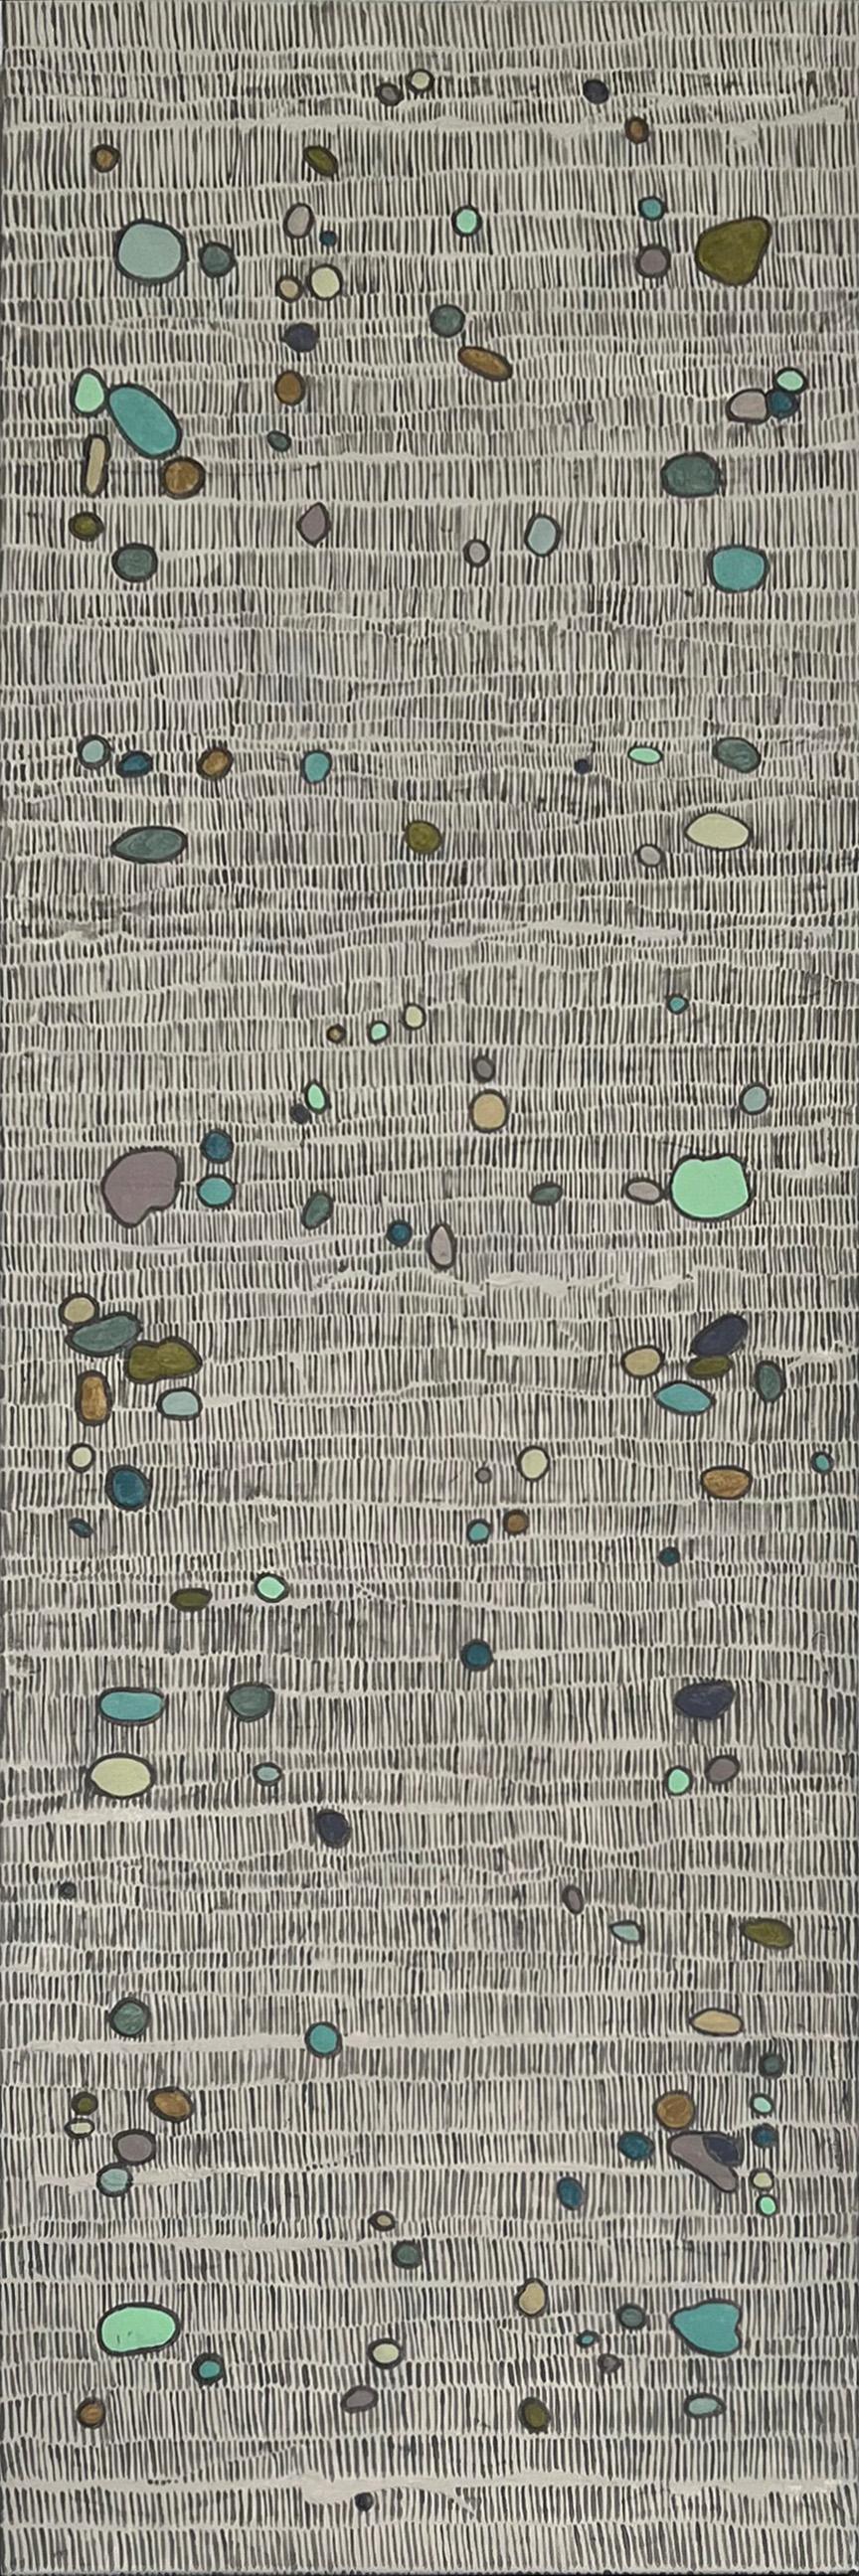 <p>Artist Comments<br>Artist Terri Bell displays a soothing abstraction of random shapes floating in a linear field. The round structures appear slightly dimensional and elevated. Terri uses an earthy color palette suggestive of small stones and